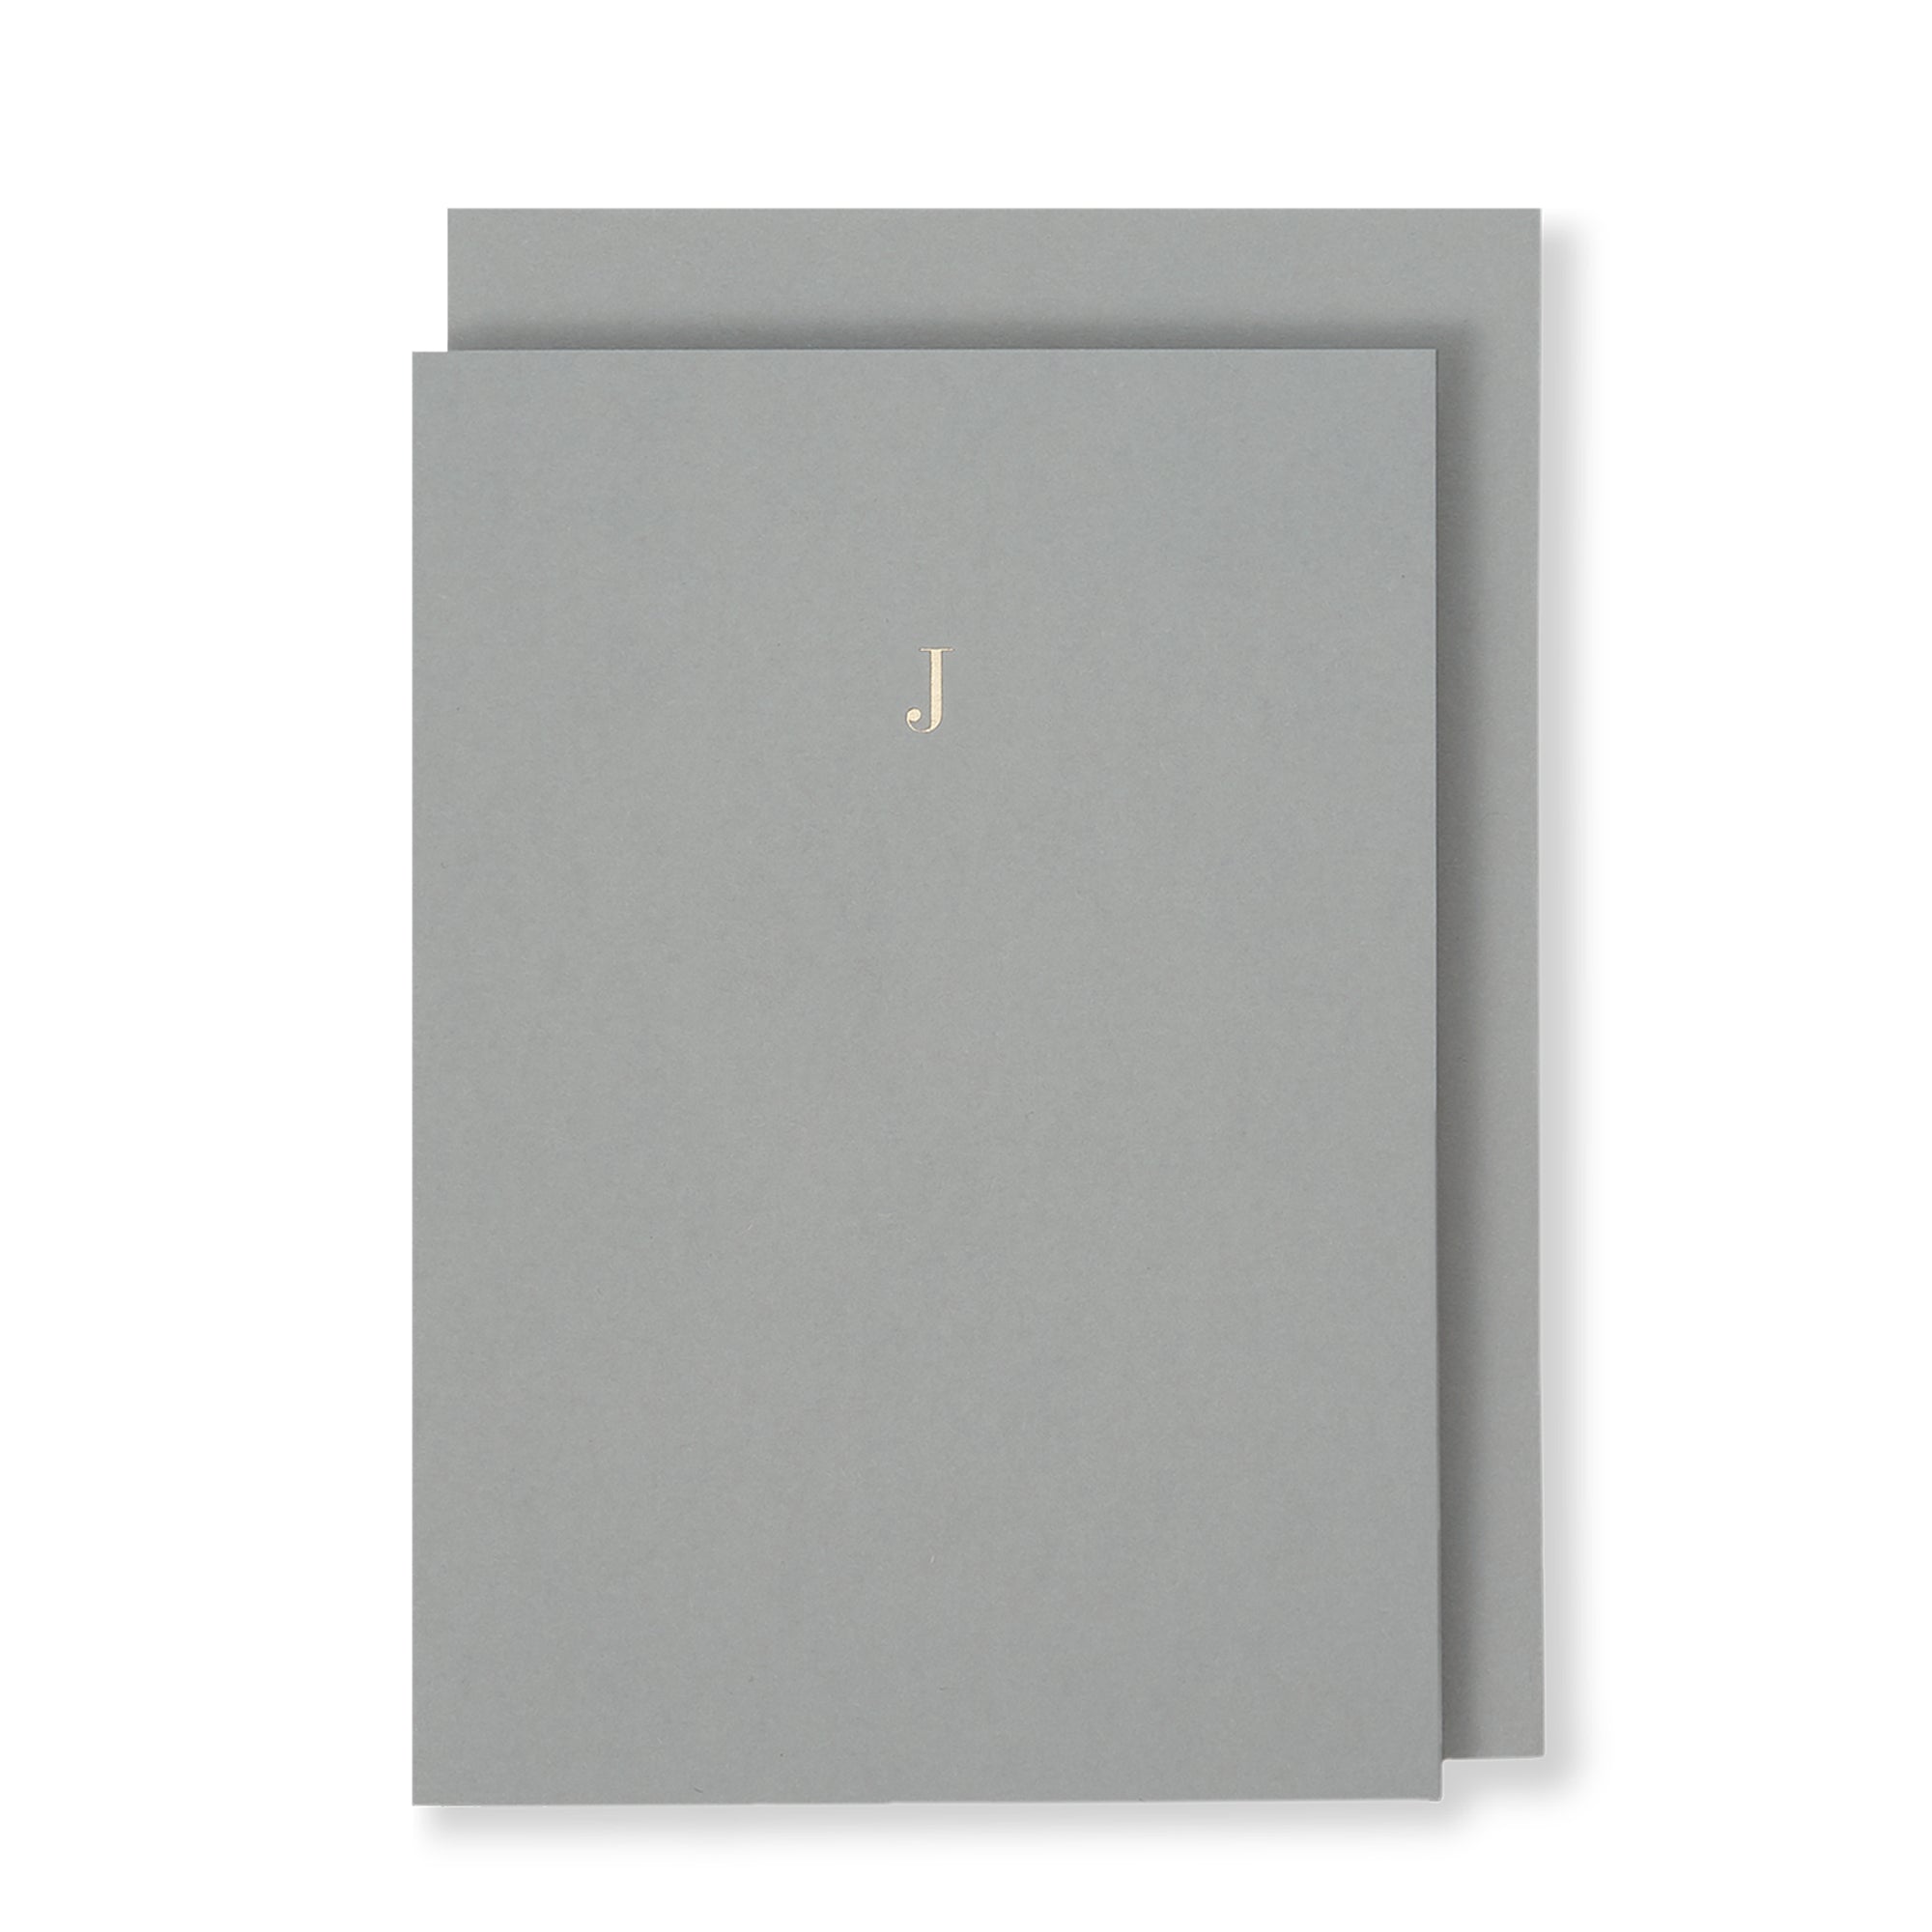 J Greeting Card in Grey, Front | Story of Elegance